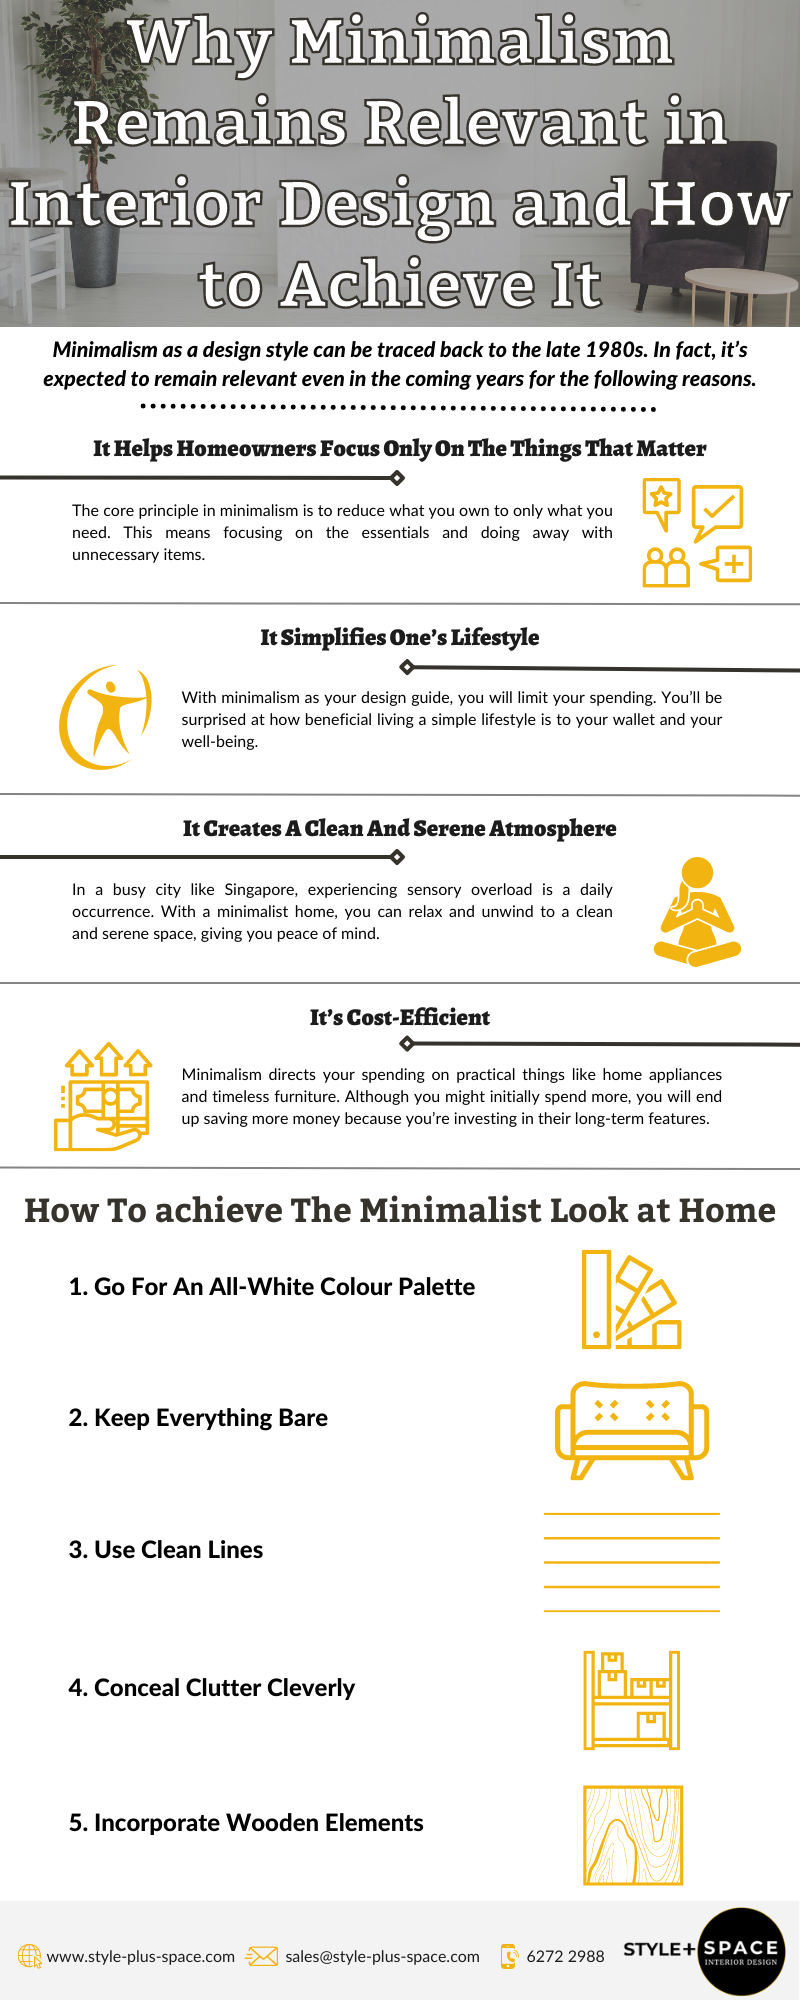 Why Minimalism Remains Relevant in Interior Design and How to Achieve It